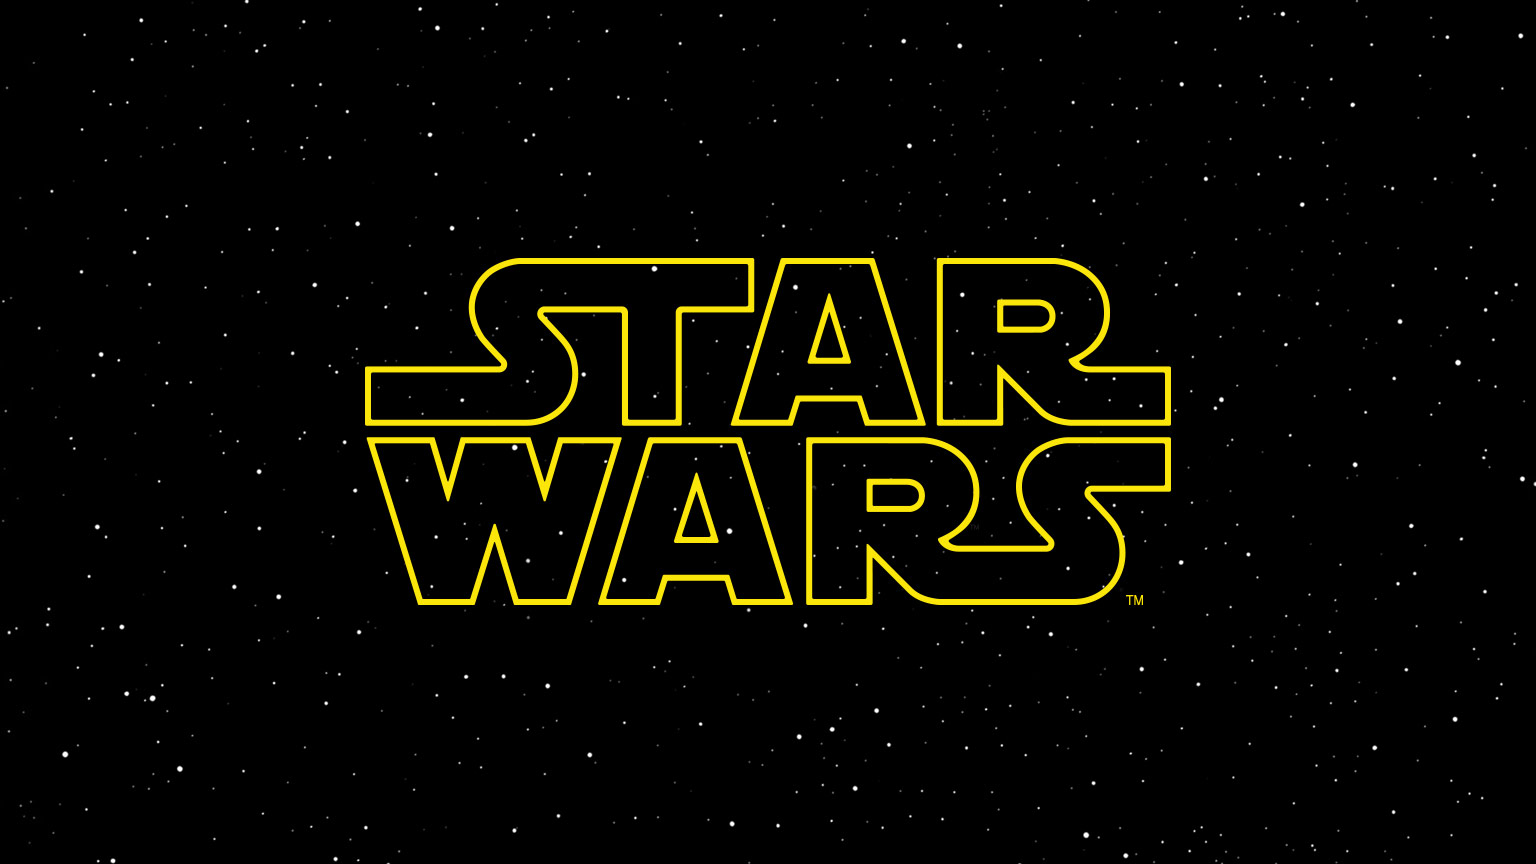 Star Wars logo to introduce key concepts on this website